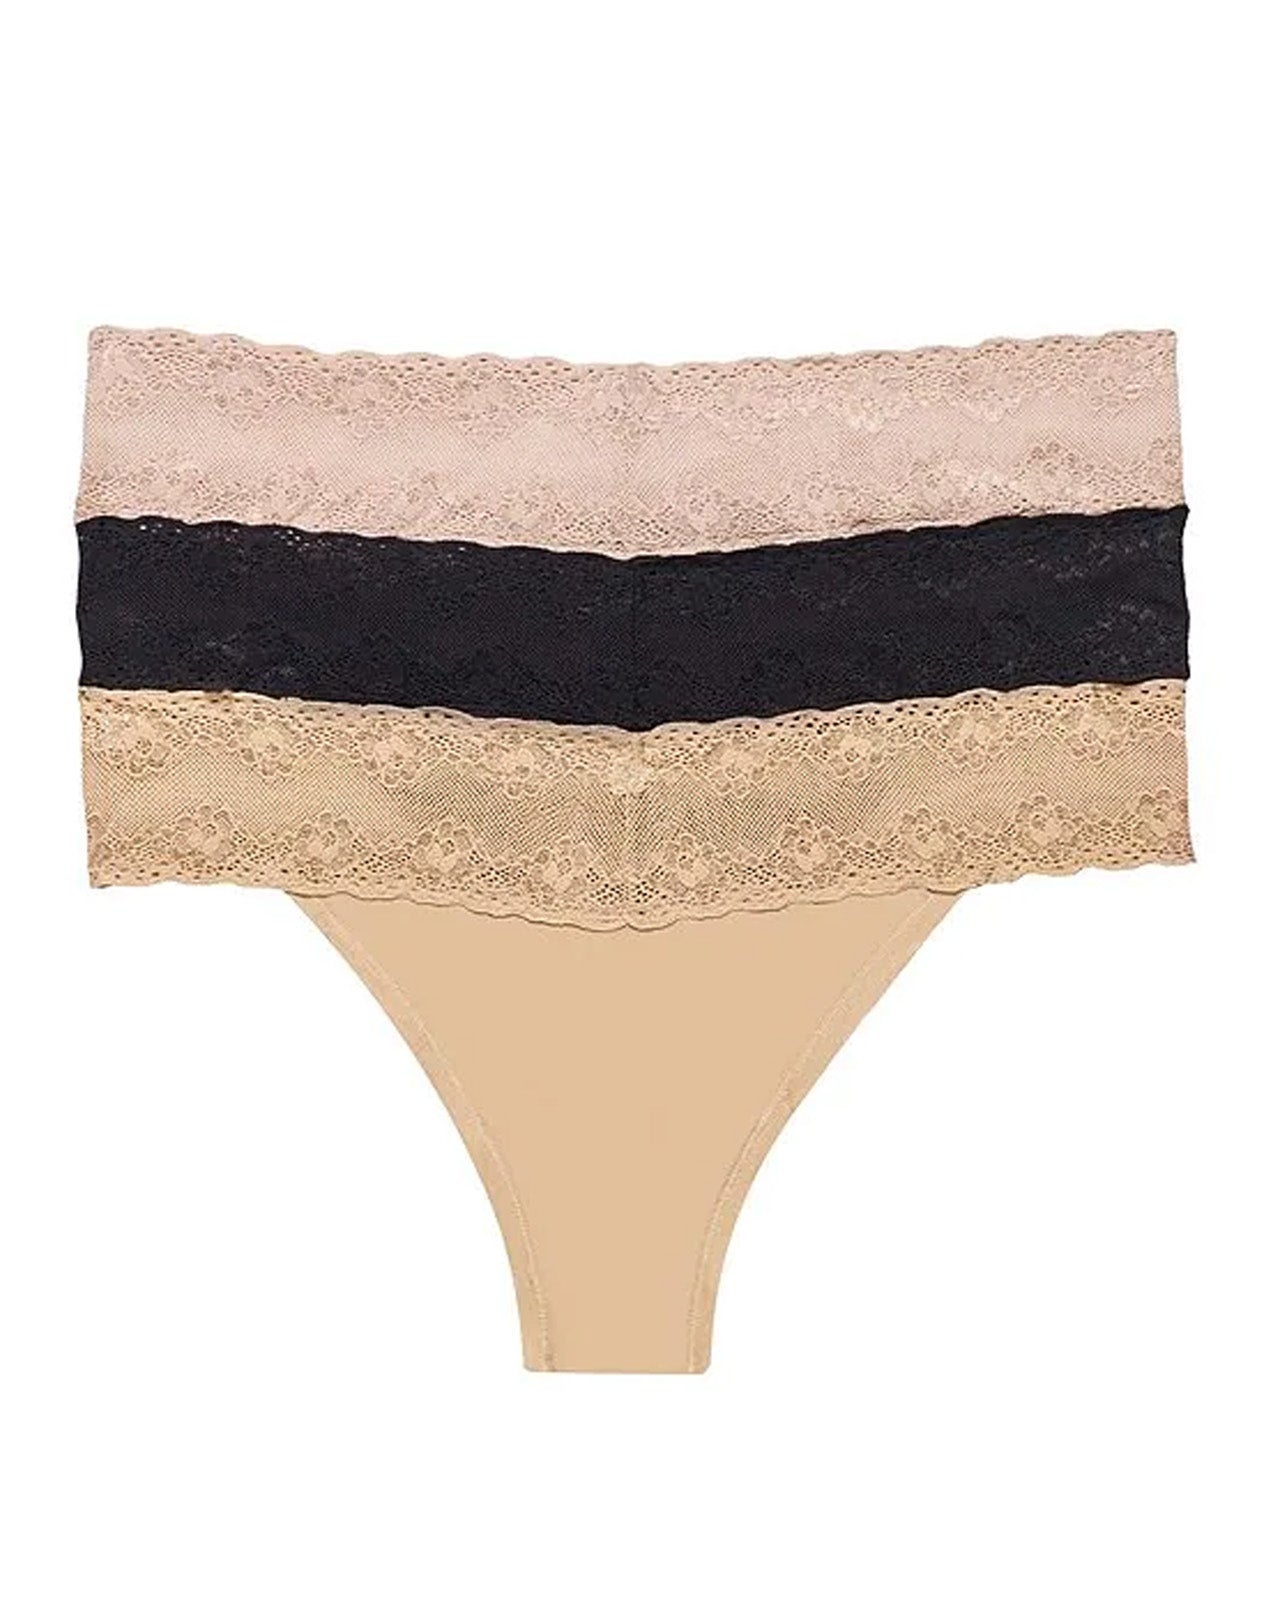 Natori Bliss Perfection One-Size Thong 3 Pack - Cameo Rose, Black, Cafe